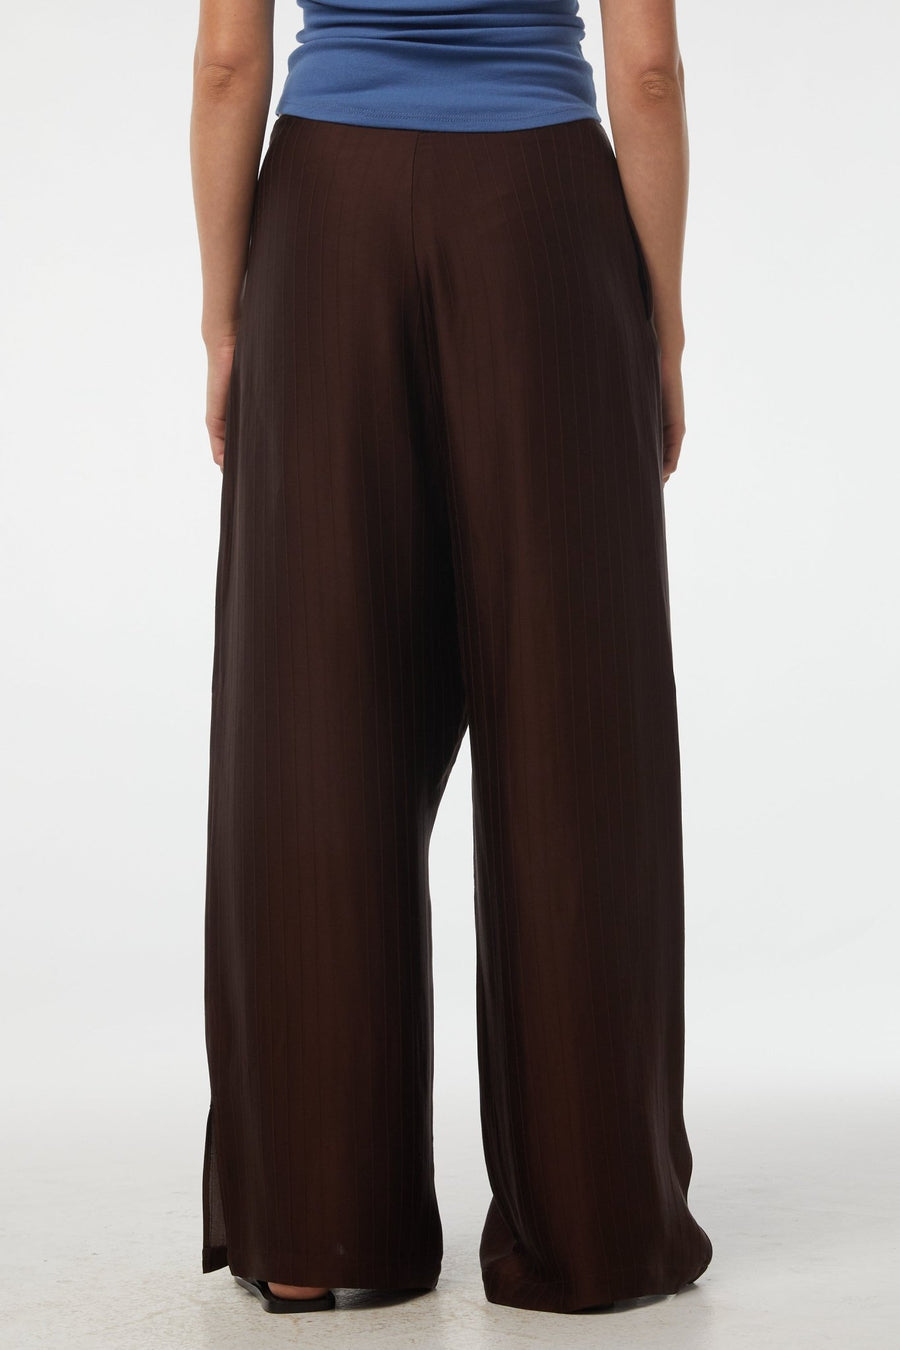 Line by K Brown Chimon Trousers